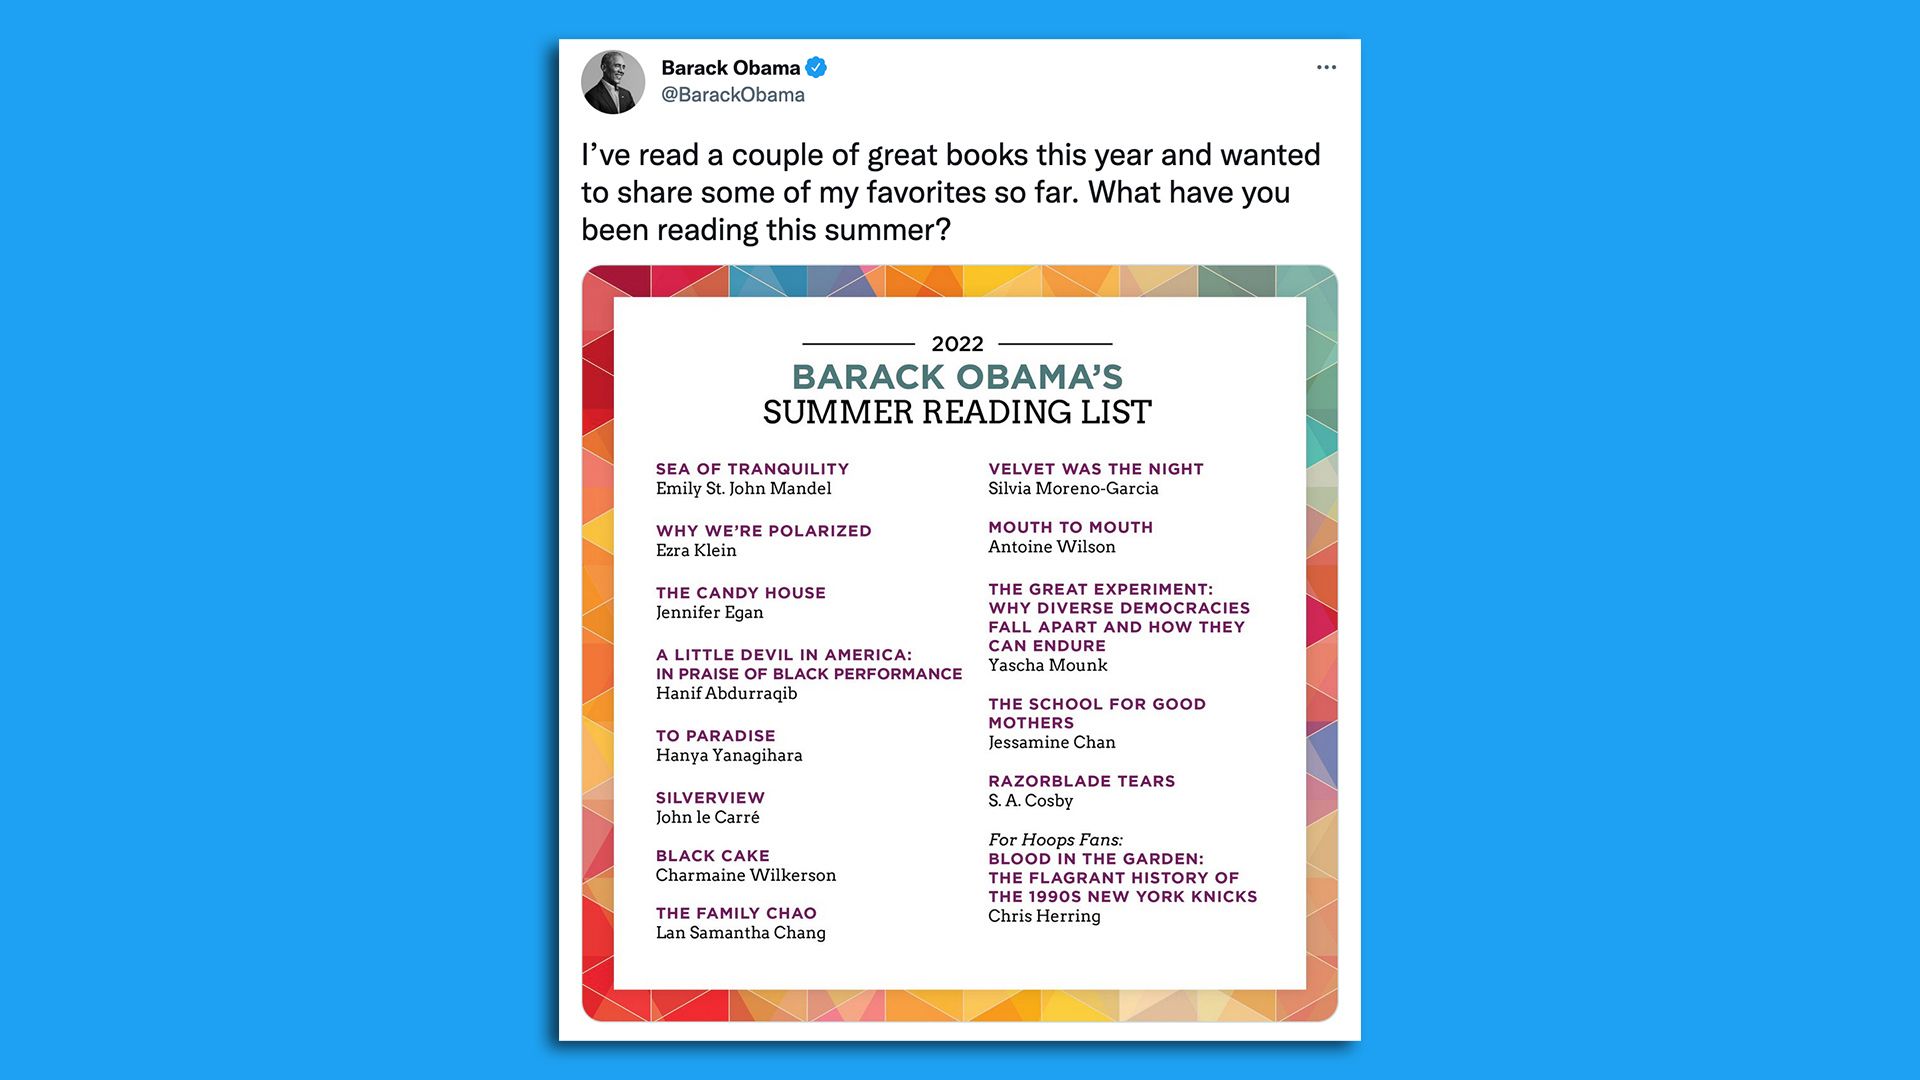 A screenshot of Barack Obama's tweet sharing his summer reading list, including John Le Carre's "Silverview."